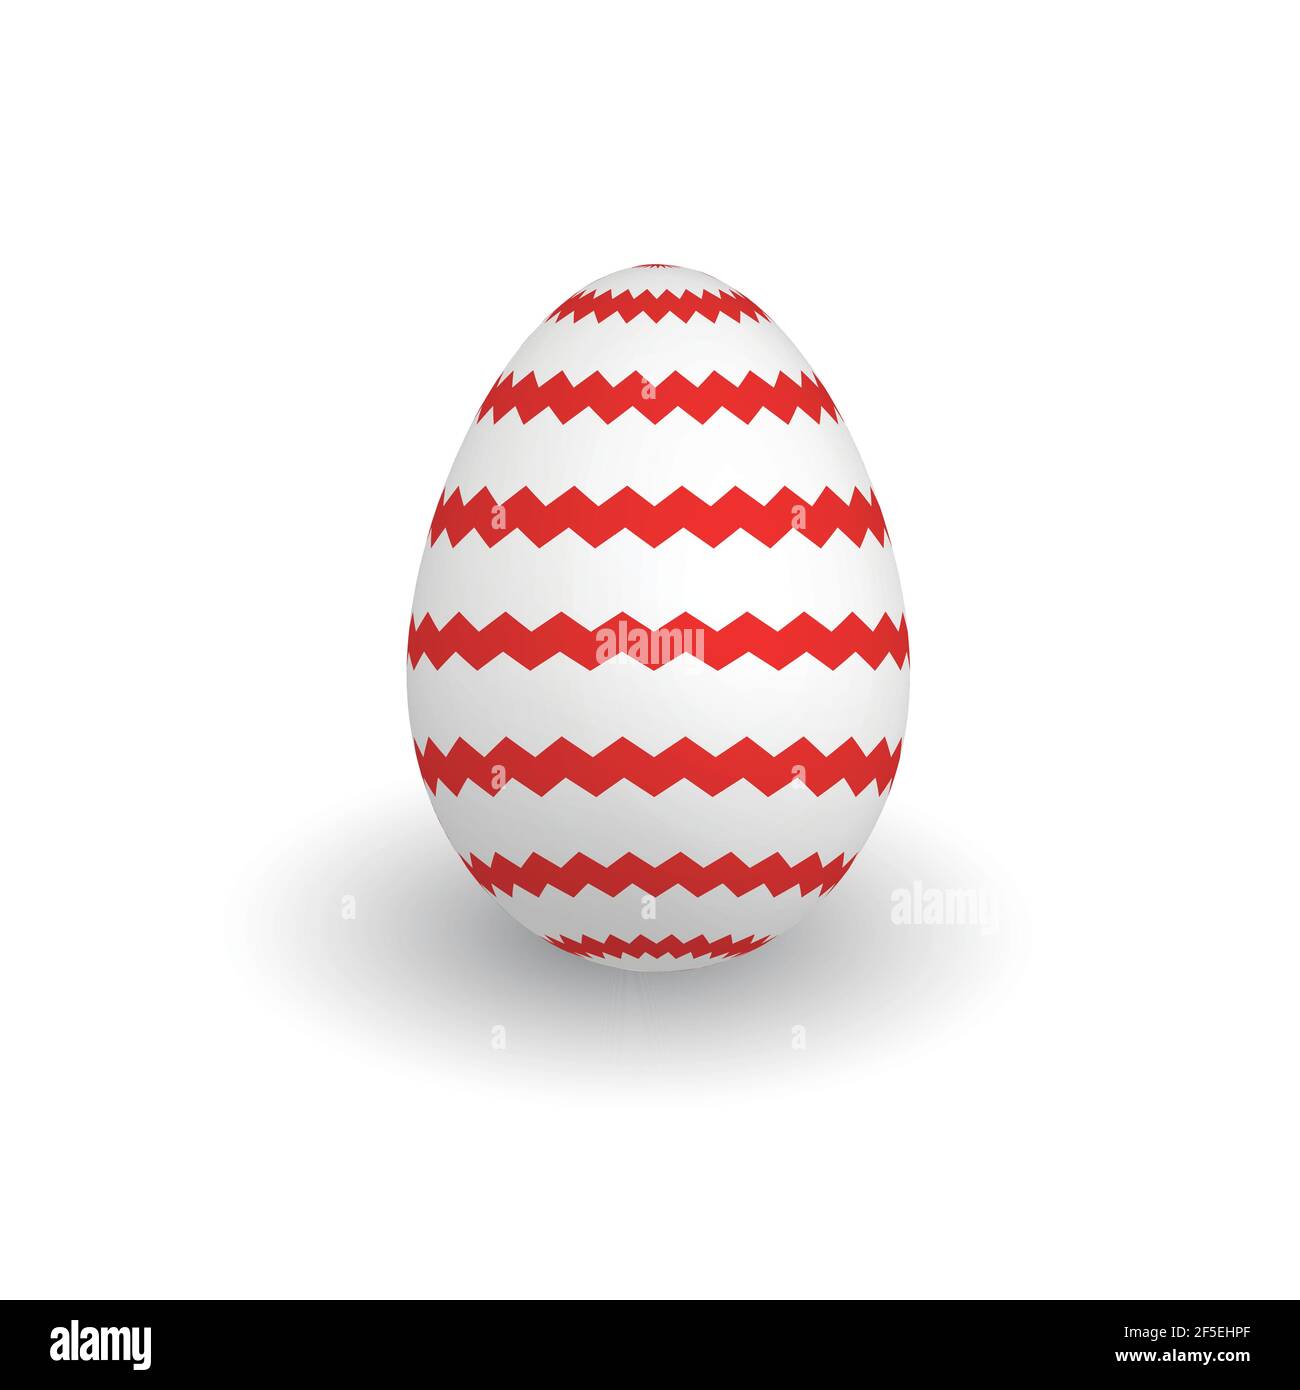 PNG Vector realistic chocolate eggs